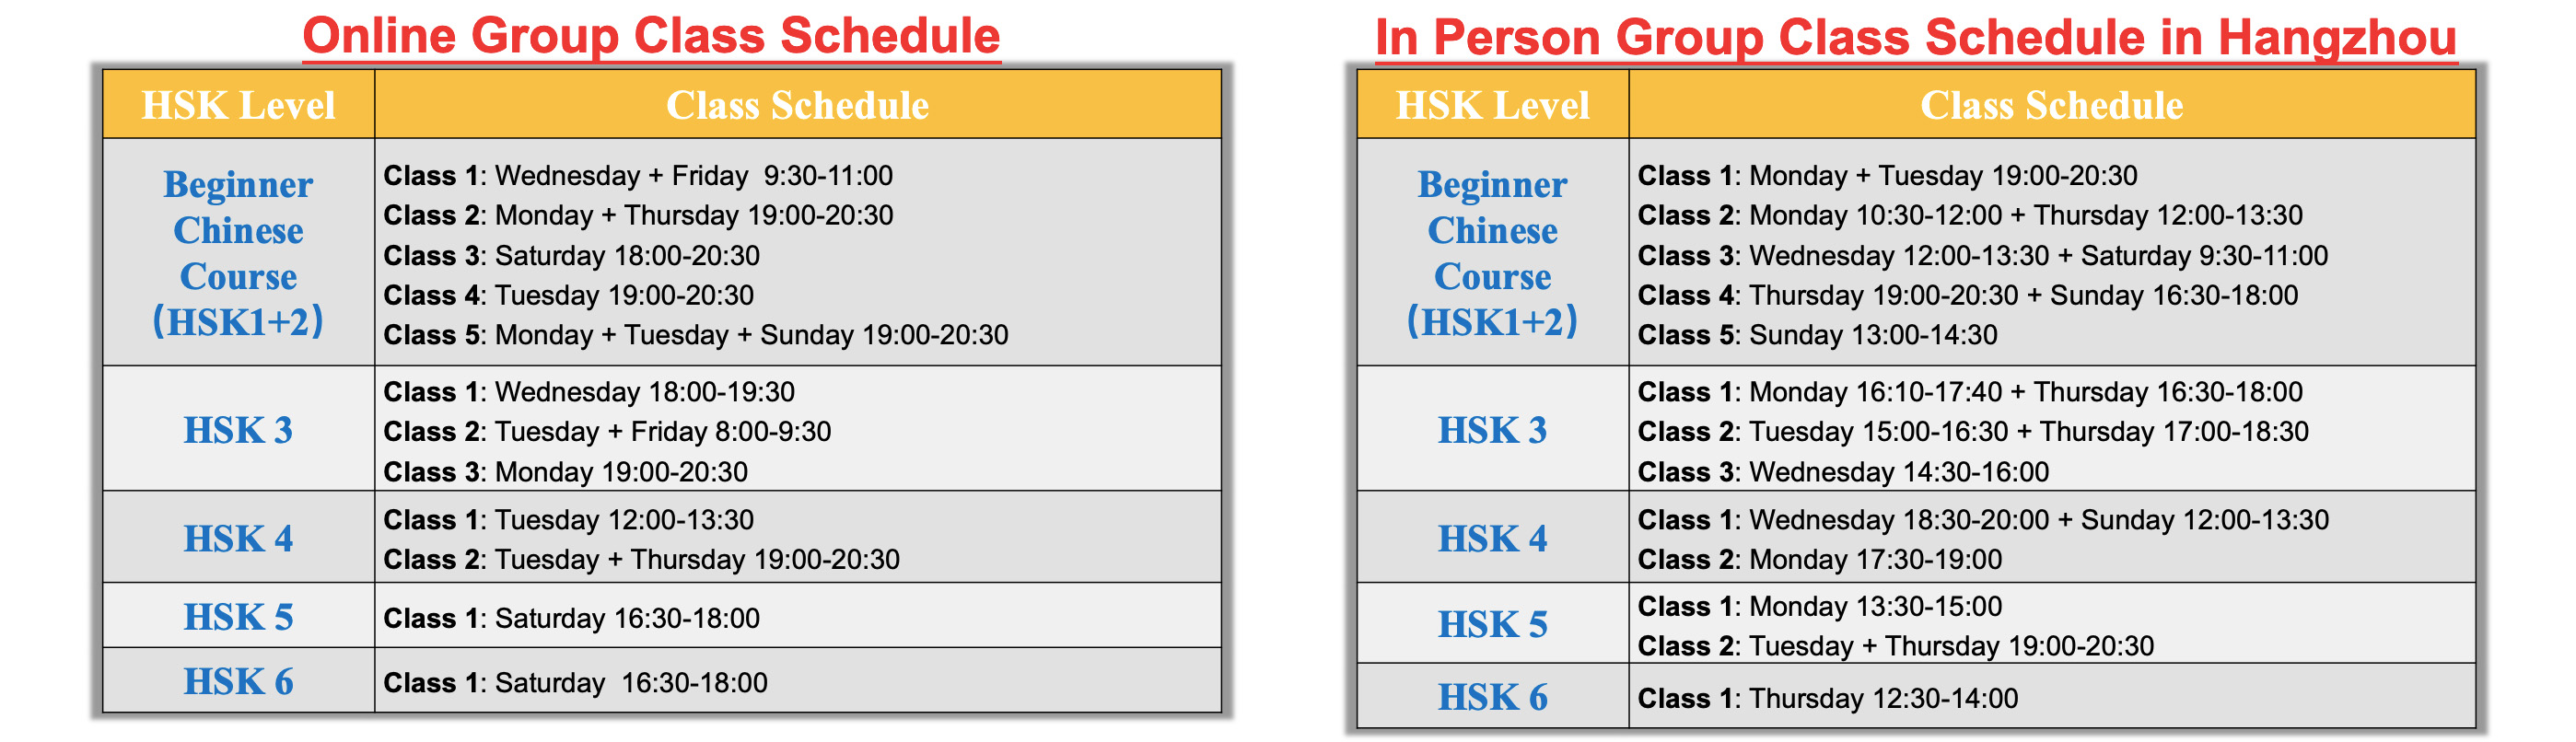 Online Group Classes/Group Classes in Hangzhou